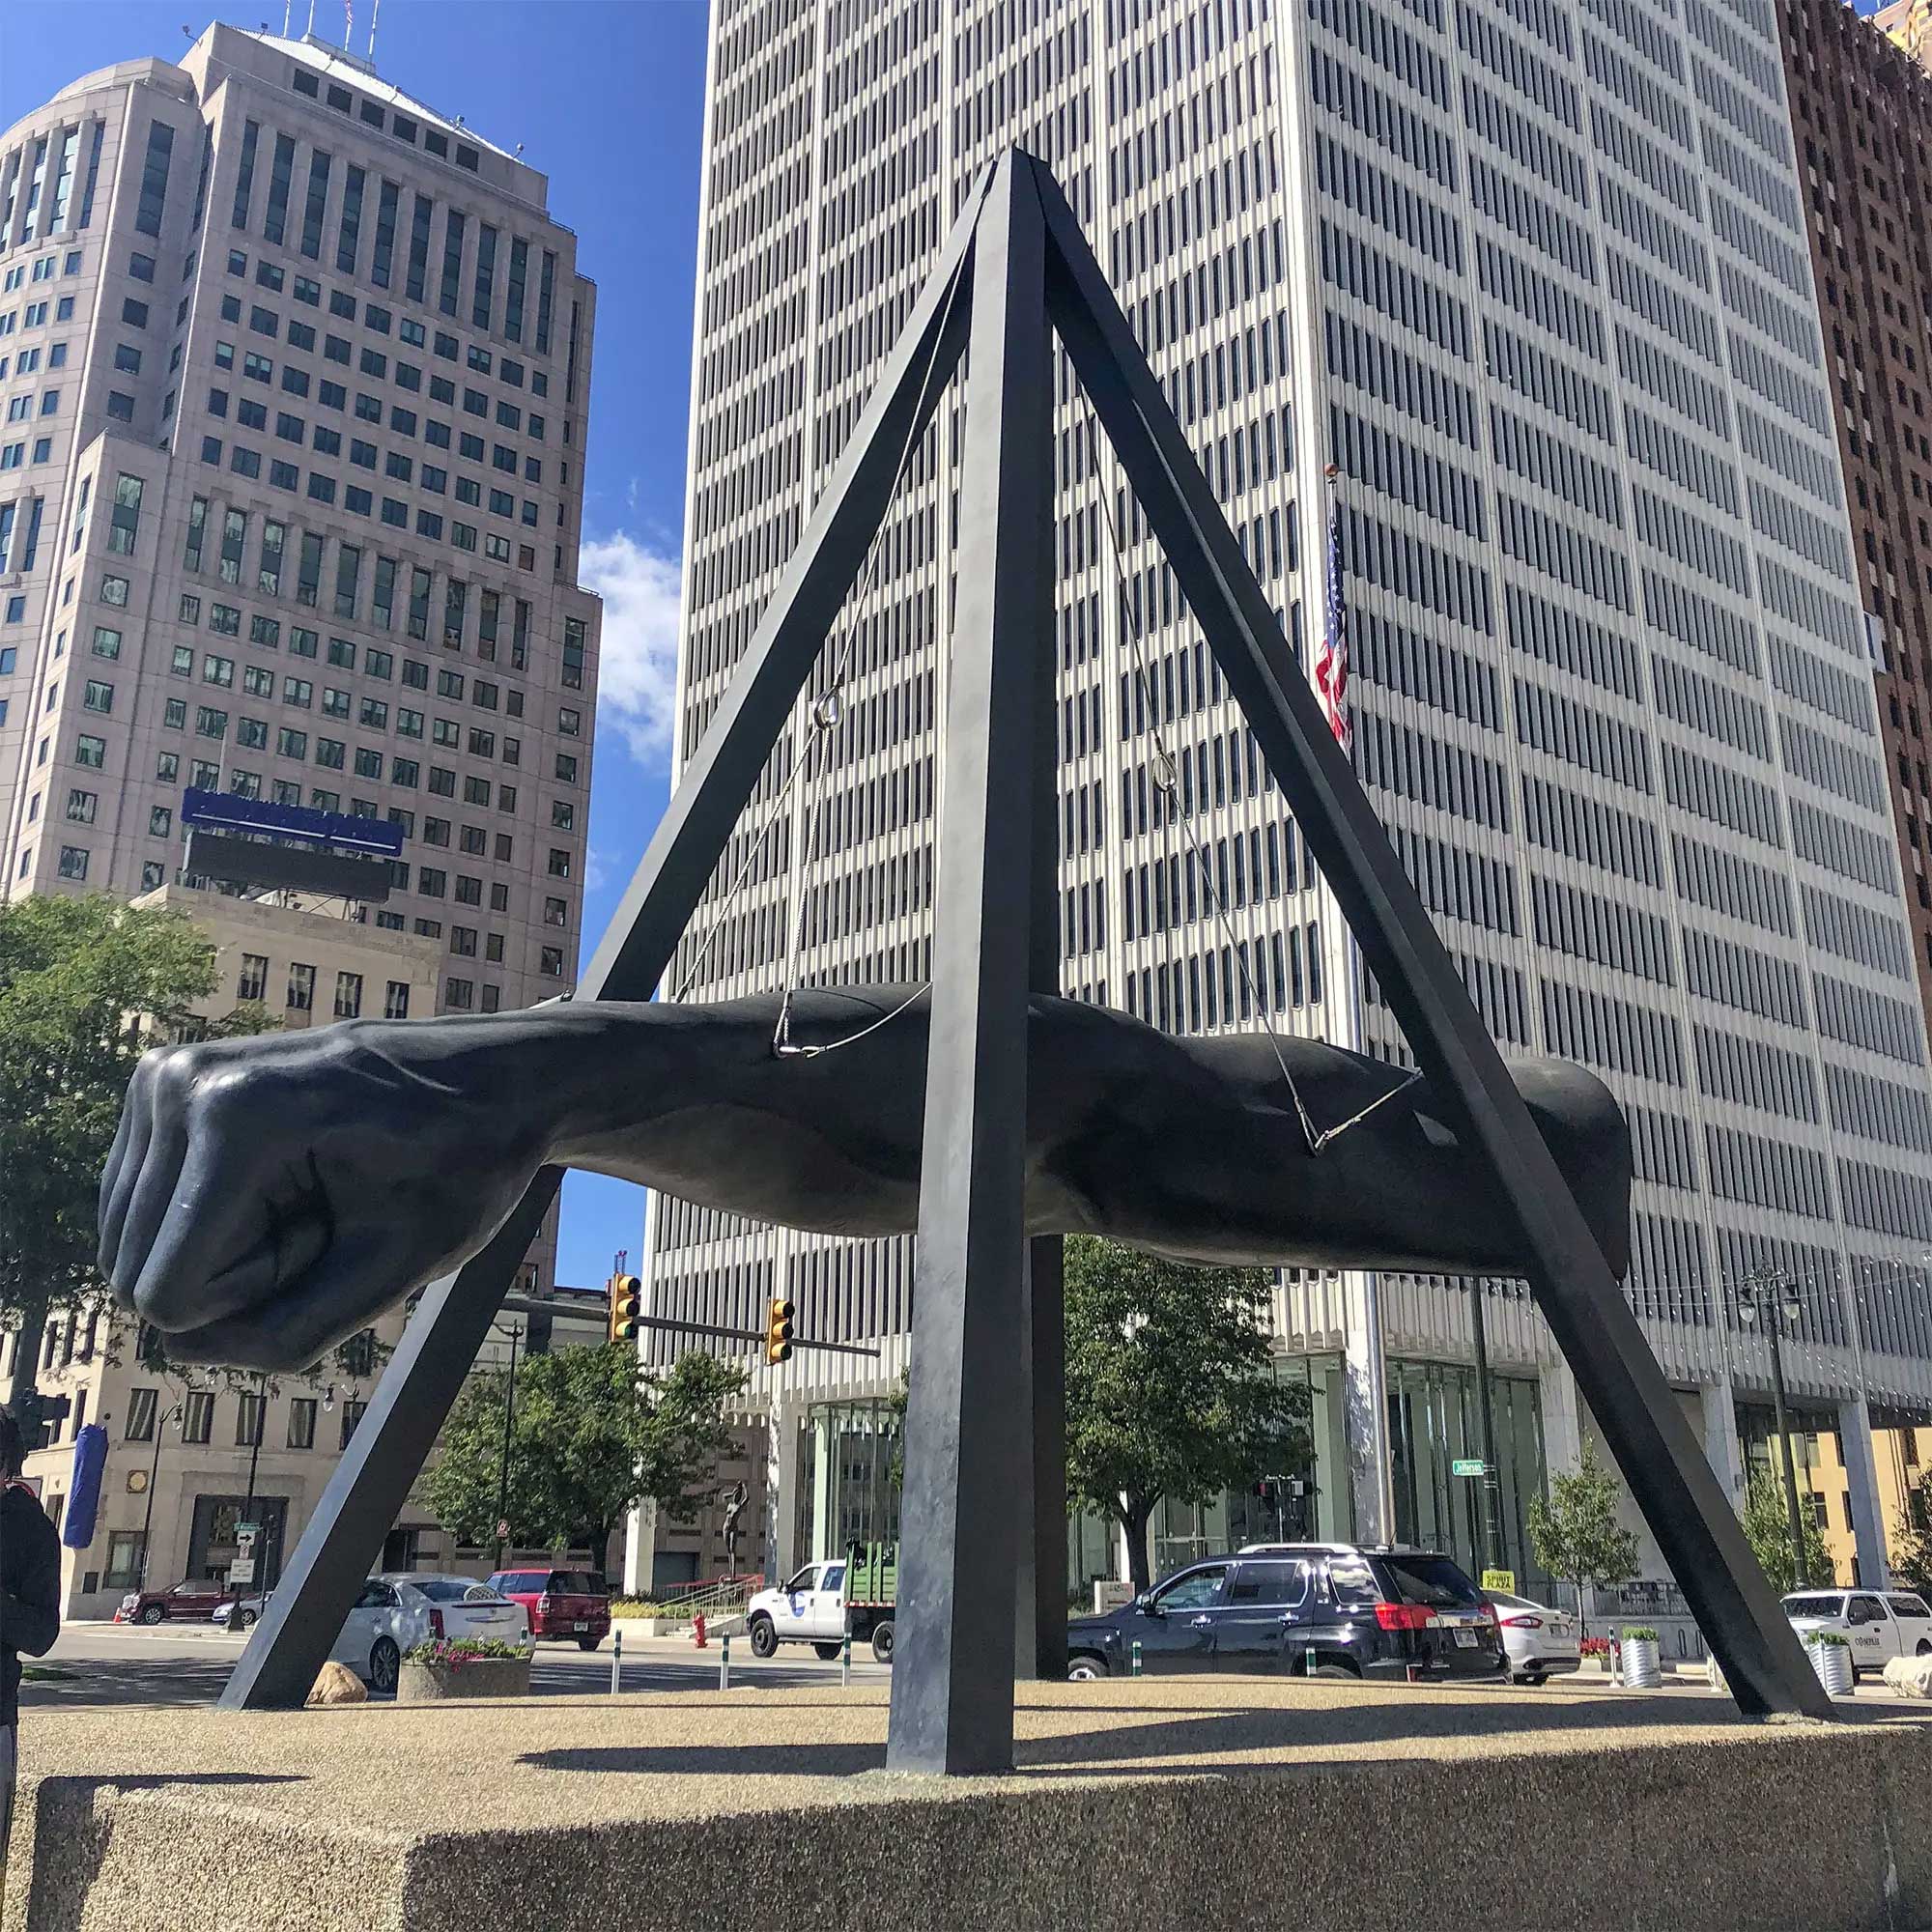 the Monument to Joe Louis